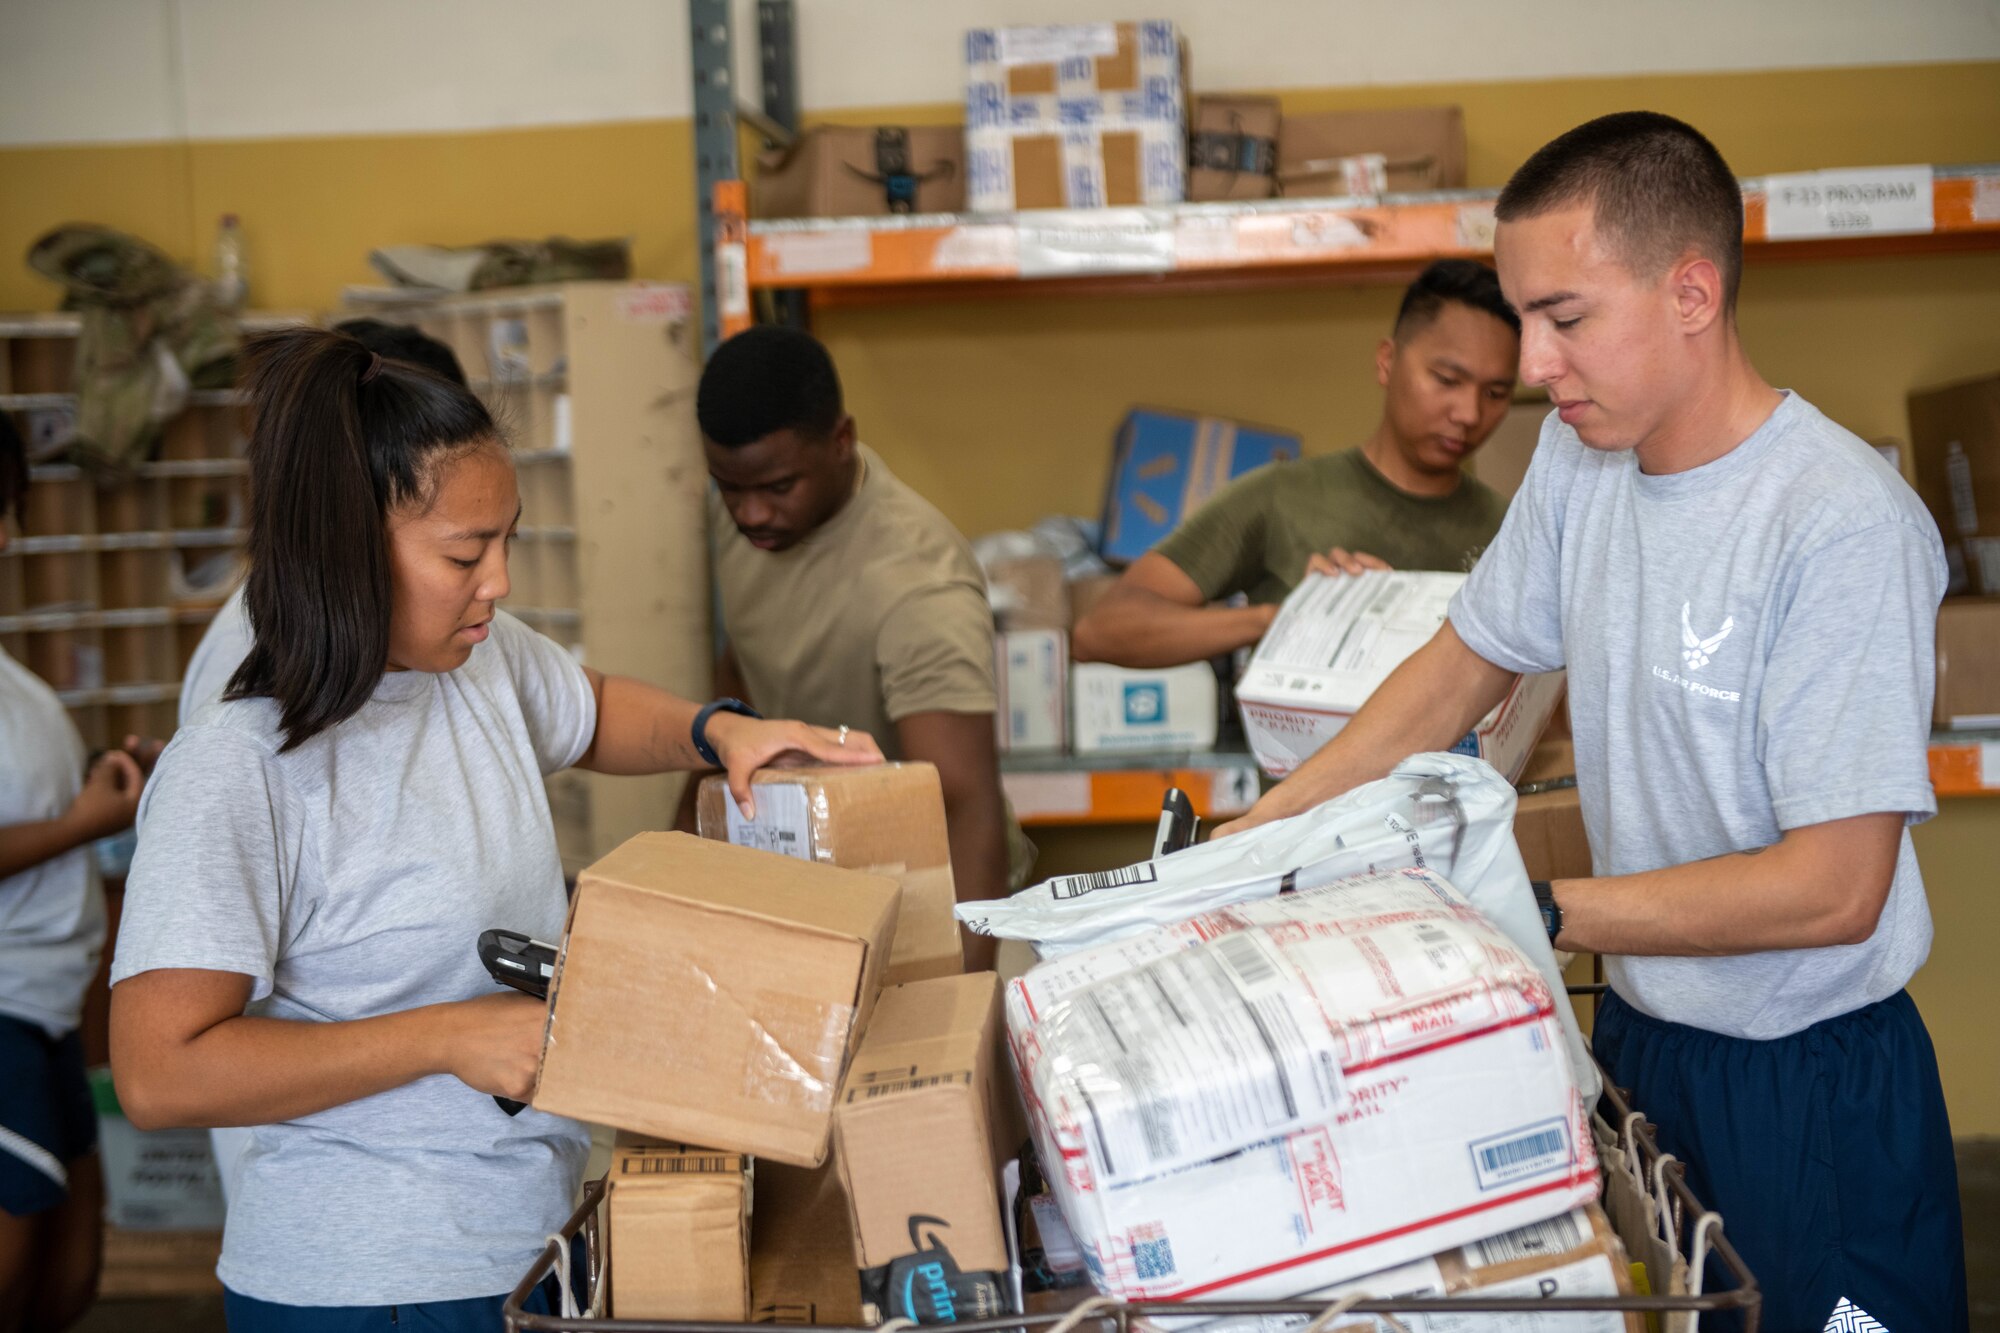 U.S. Air Force military postal clerks from the 379th Expeditionary Force Support Squadron, along with volunteers, scan and sort incoming mail at Al Udeid Air Base, Qatar, Sept. 1, 2022. Volunteers assist with unloading and sorting incoming mail. (U.S. Air National Guard photo by Airman 1st Class Constantine Bambakidis)